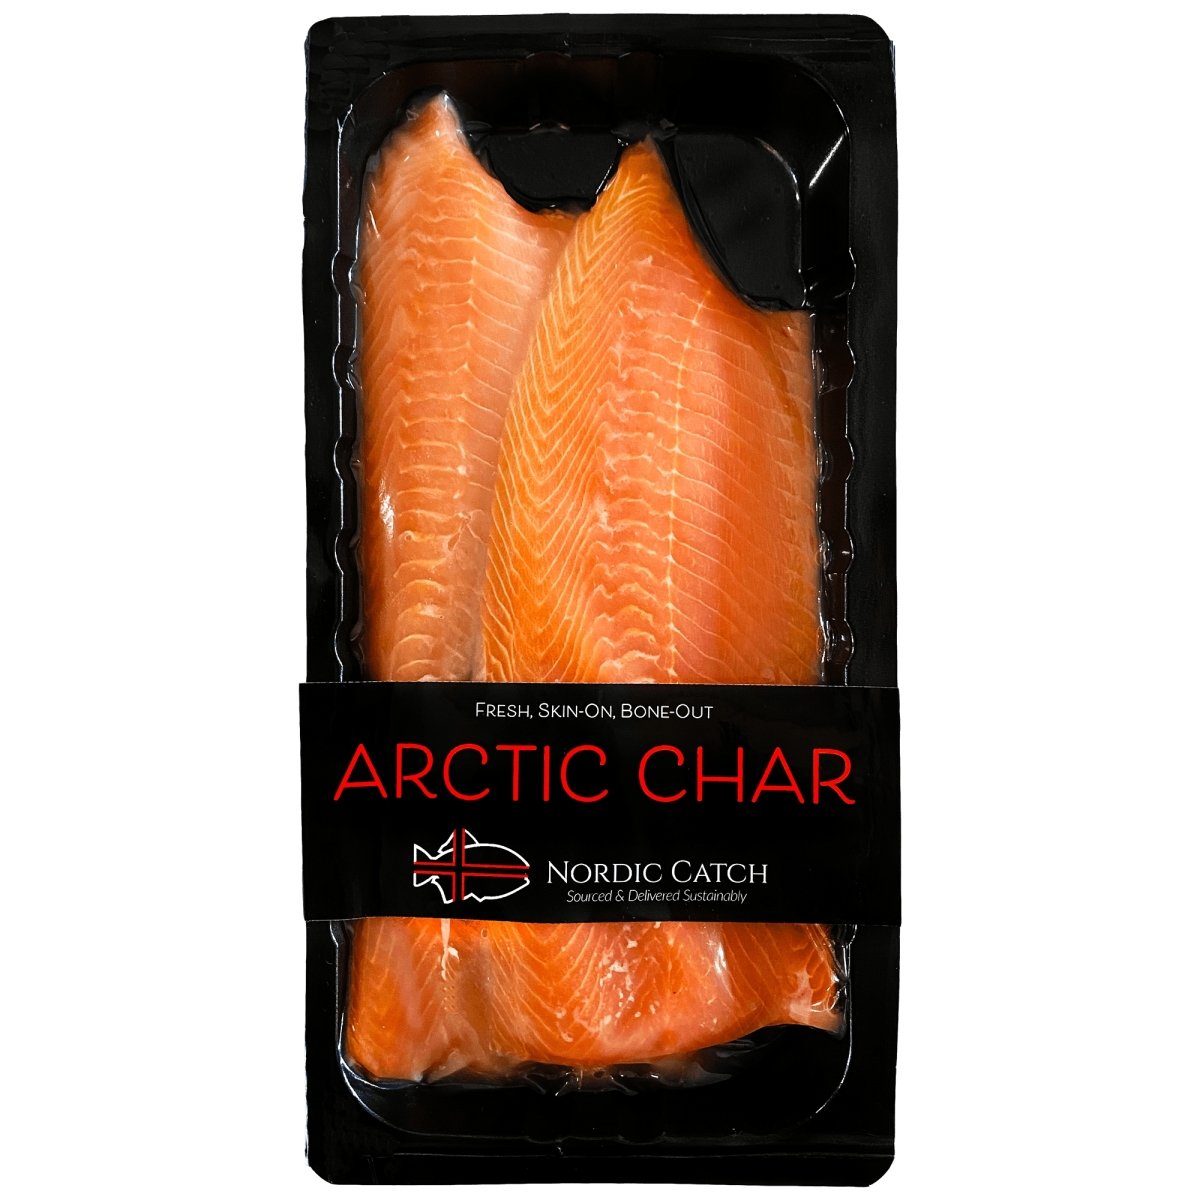 A Sample of Iceland - Bundle - Nordic Catch